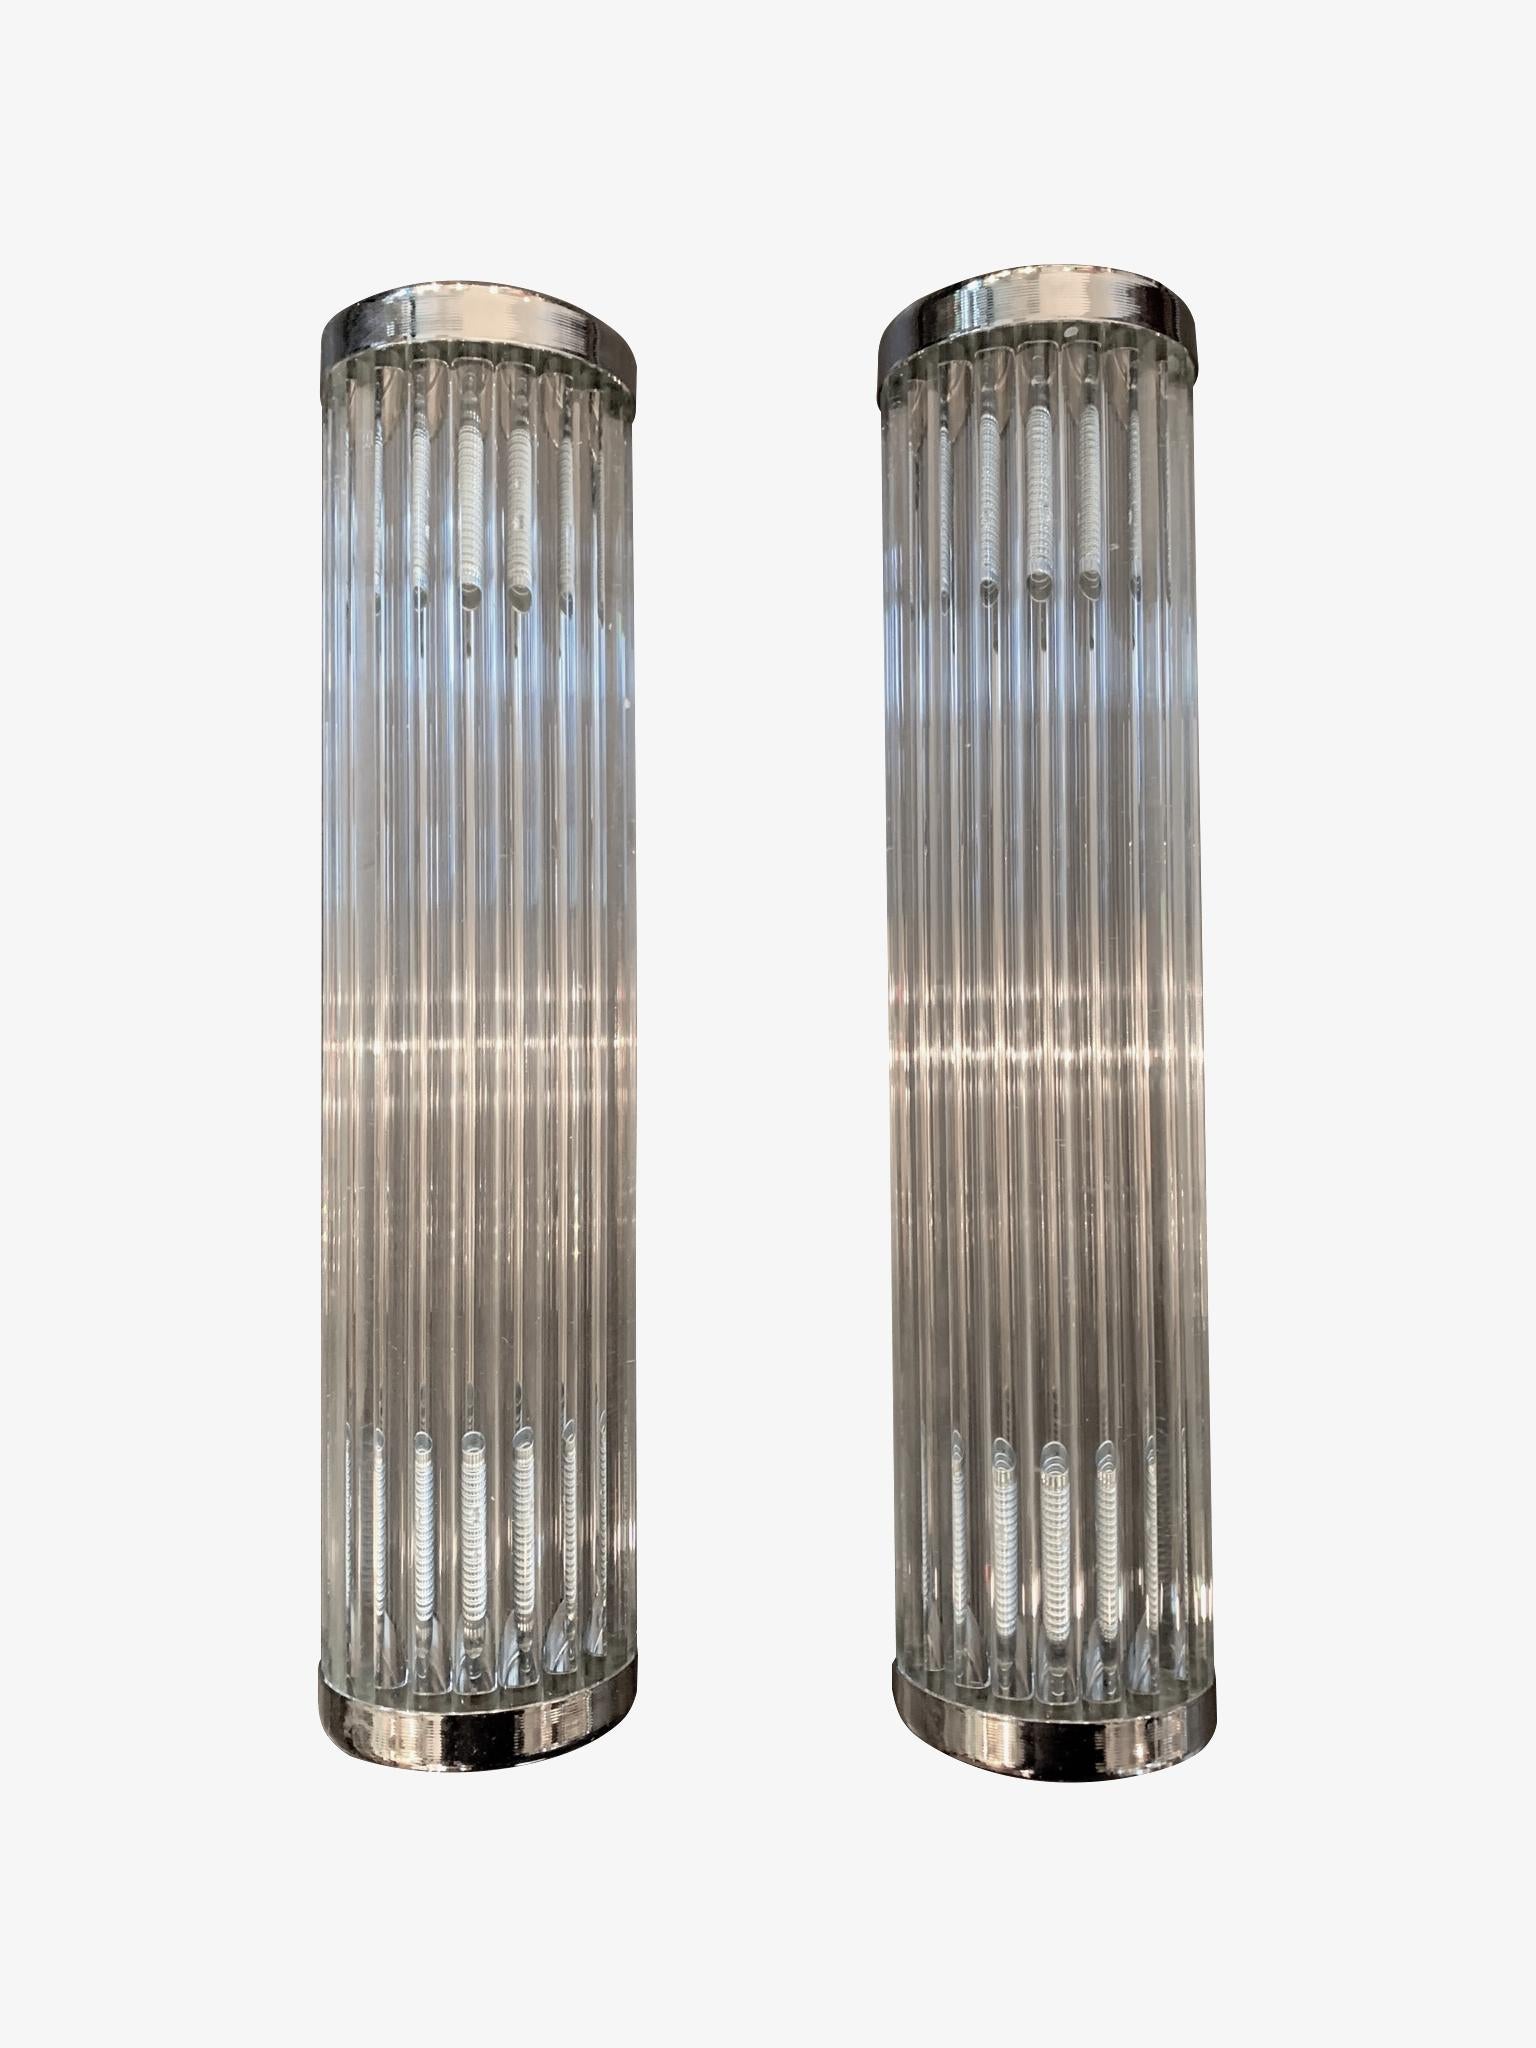 Contemporary Italian Venini Style Murano Glass Rod, Wall Sconces with Chrome Fittings